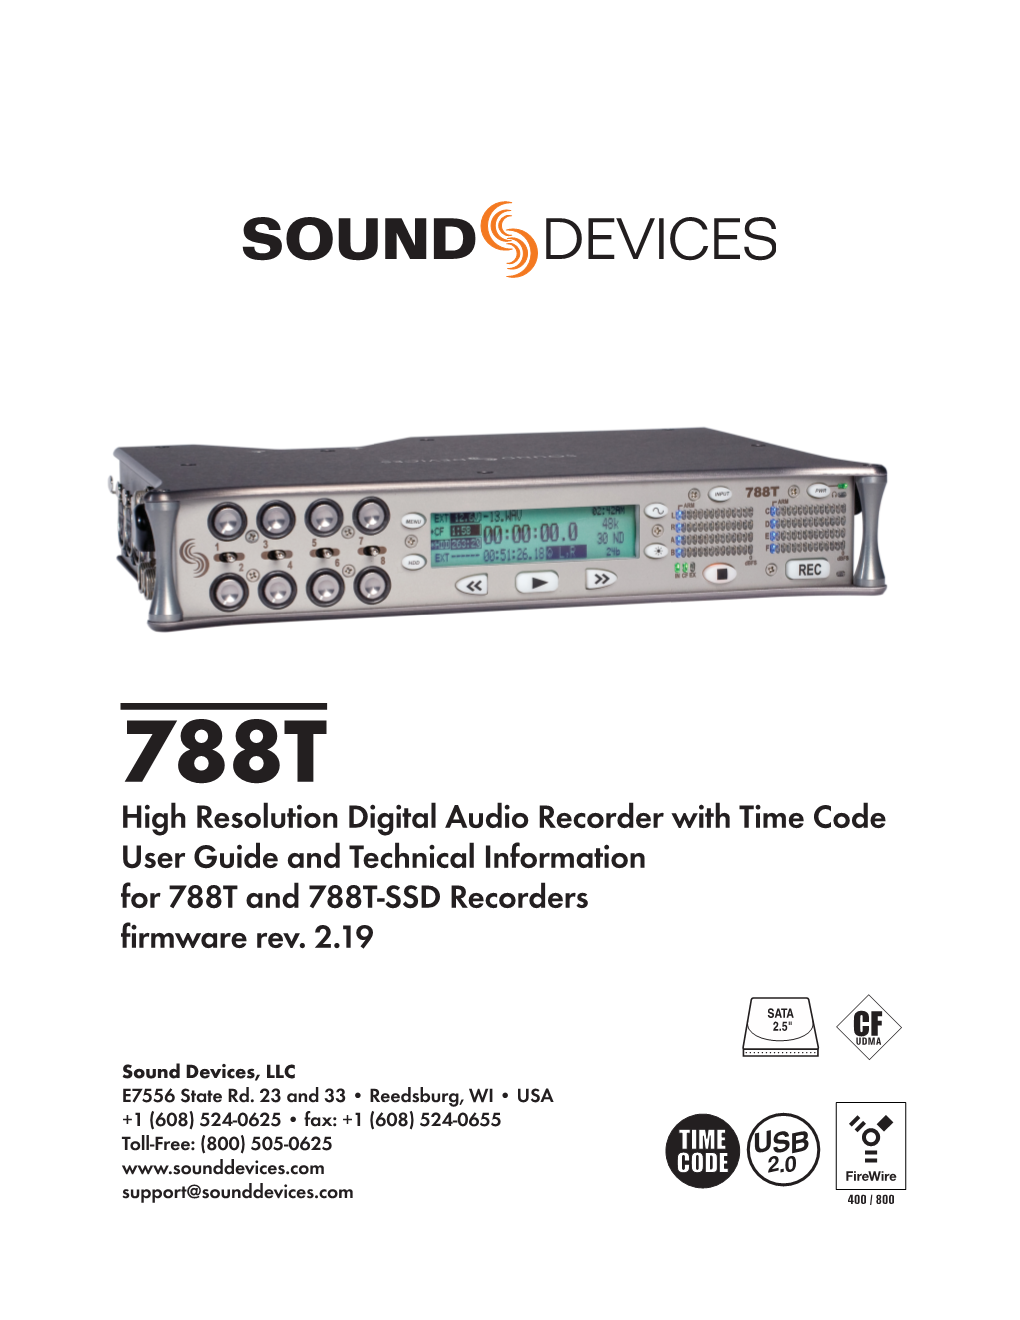 Sound Devices 788T Or 788T-SSD to Be Connected to Wave Agent Over USB